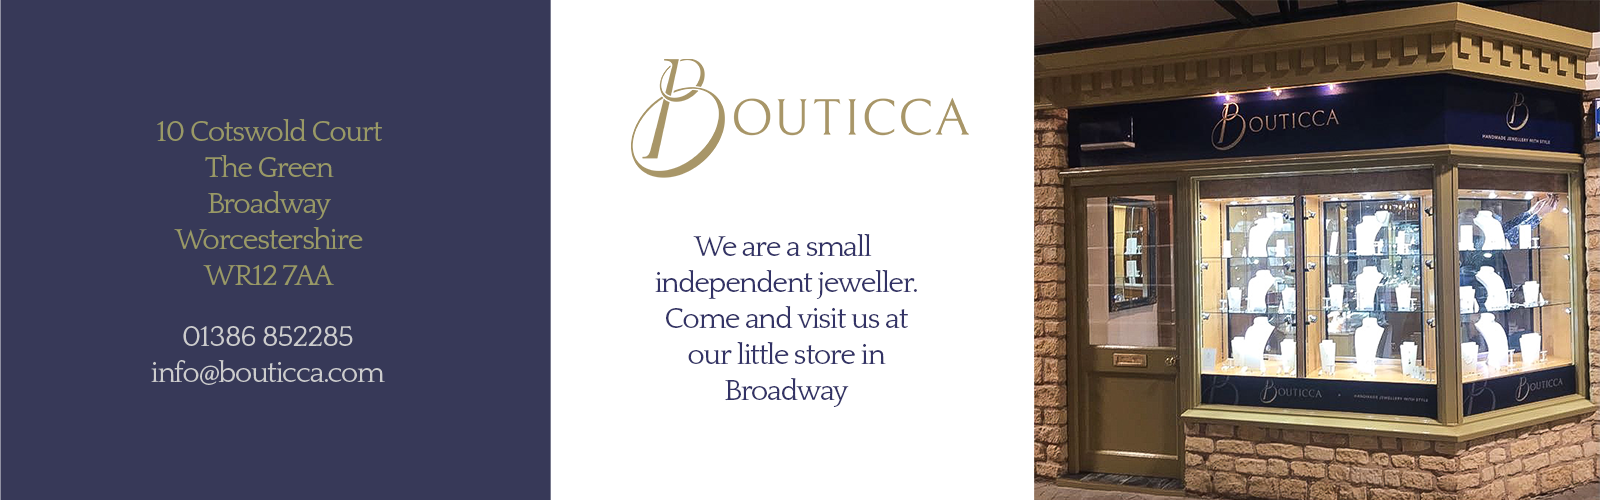 The Bouticca Jewellery Shop and address